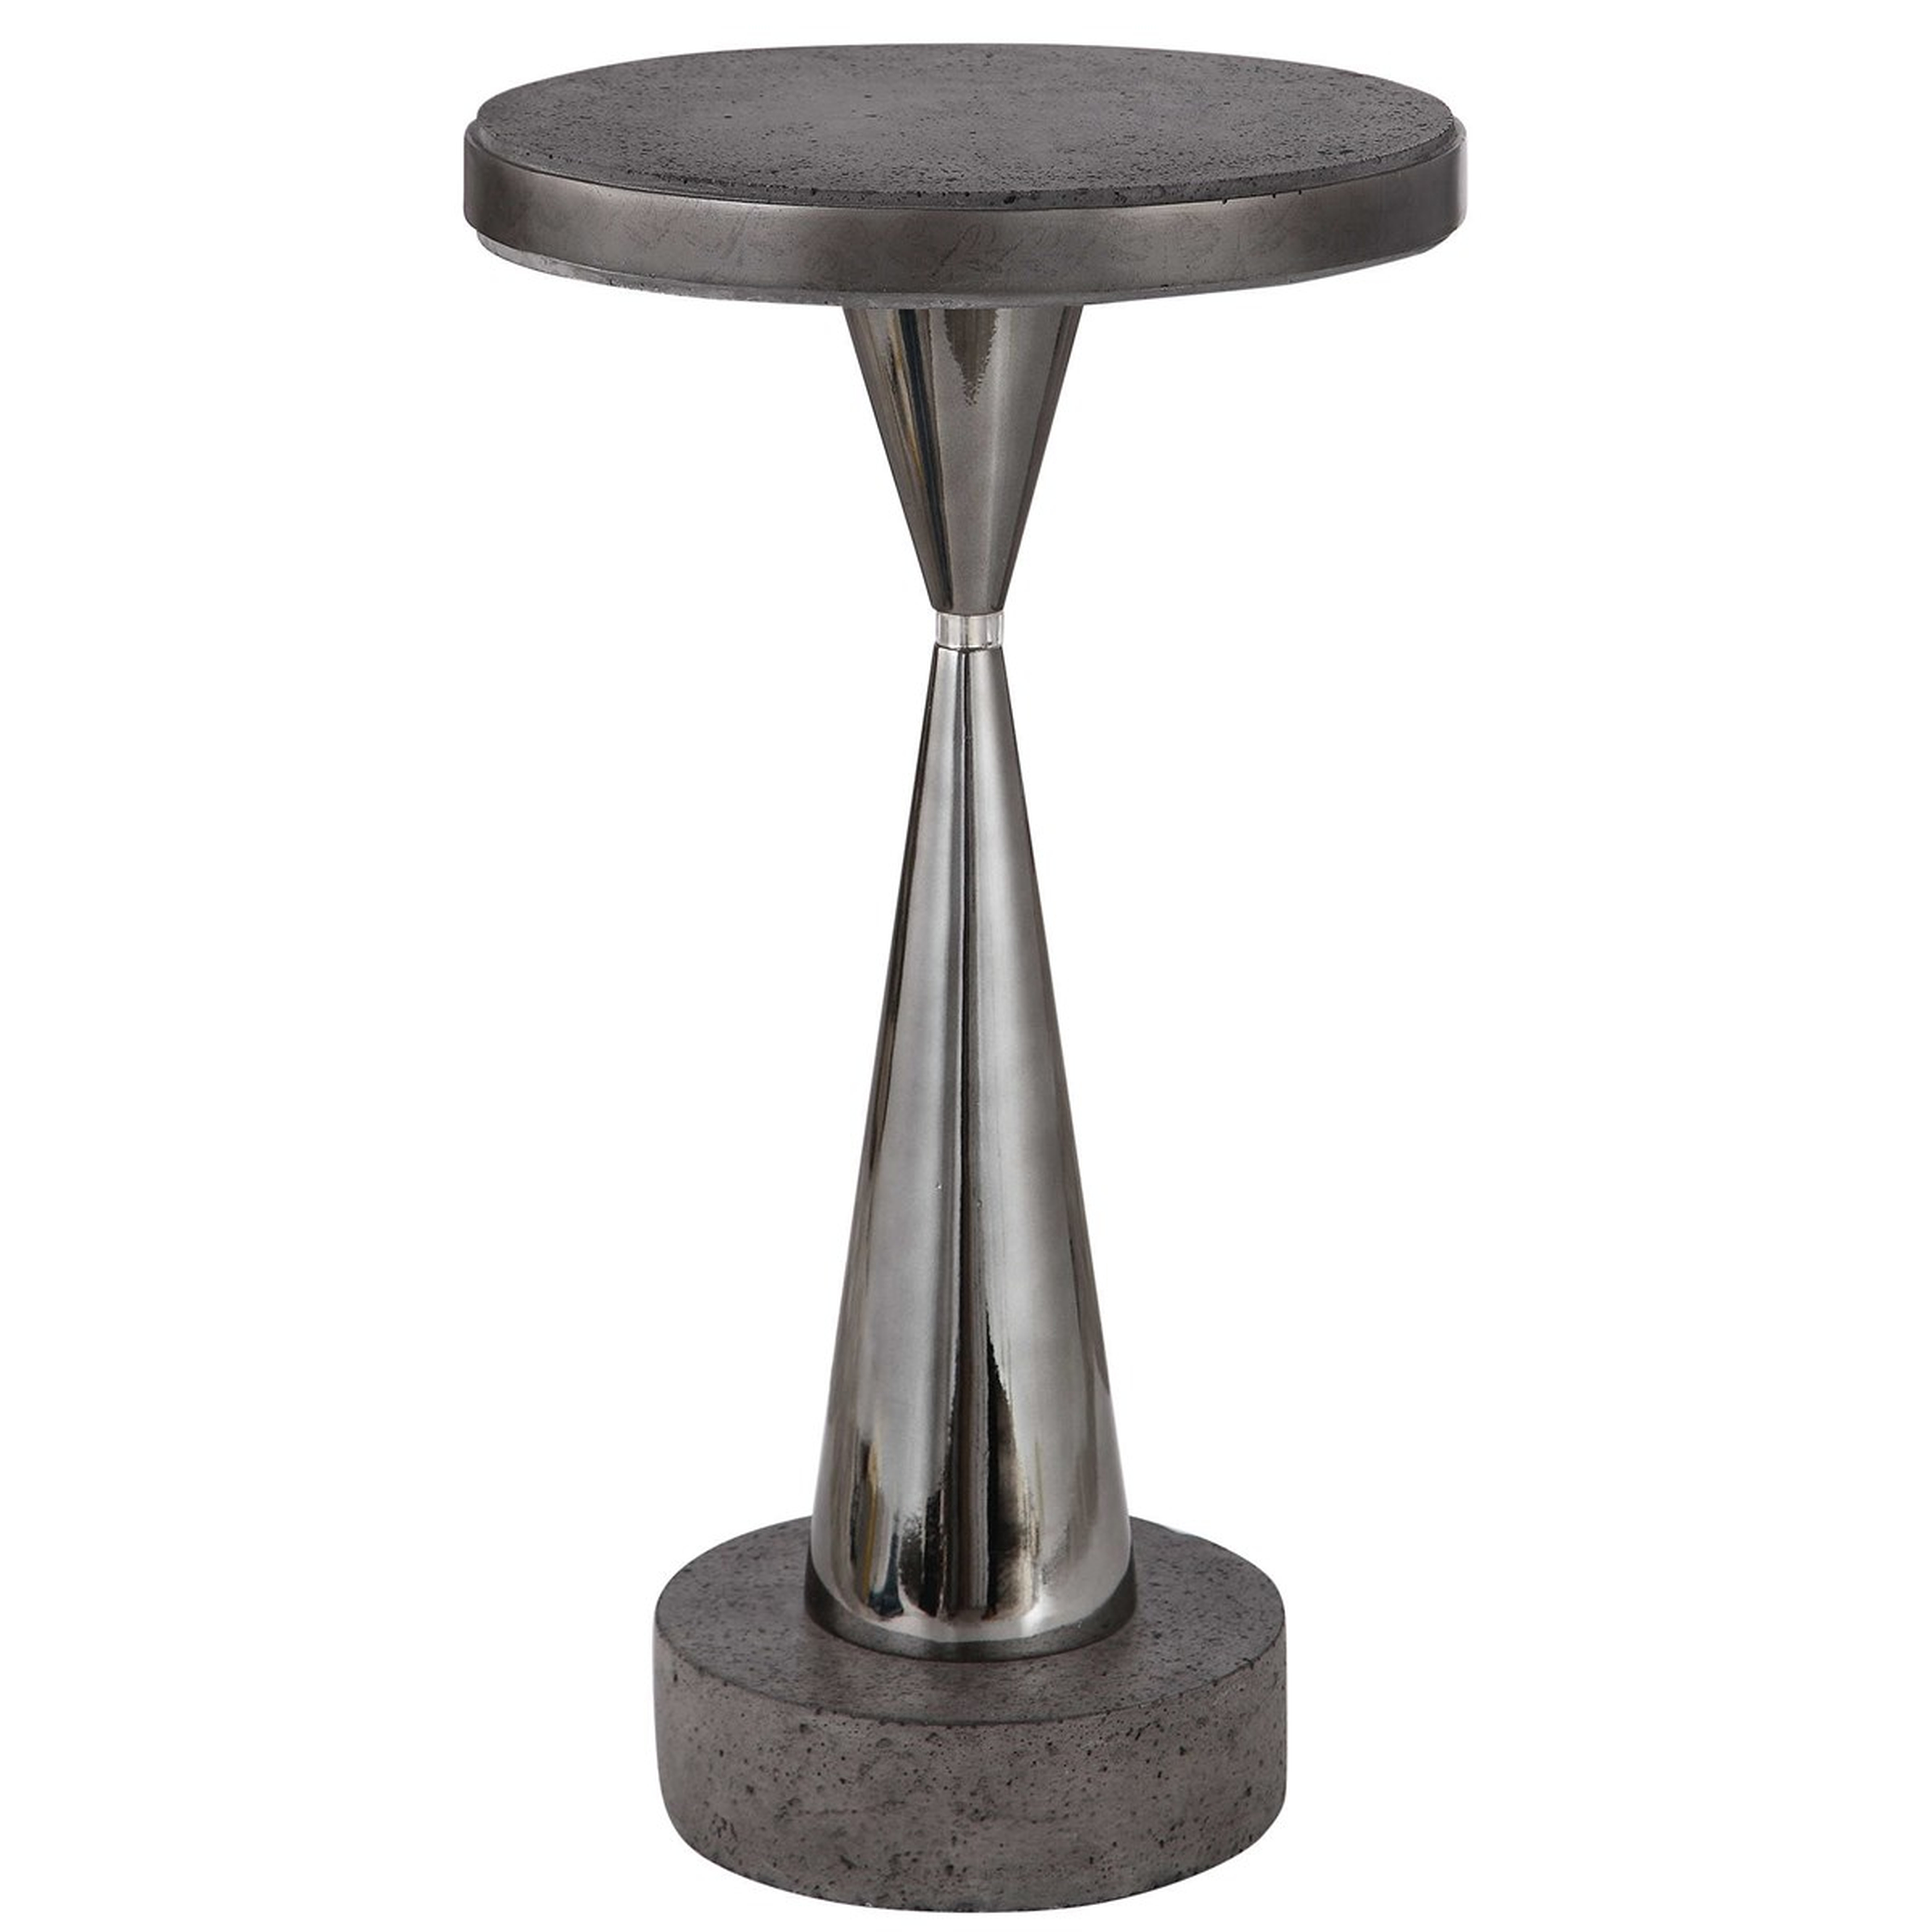 SIMONS ACCENT TABLE - Hudsonhill Foundry